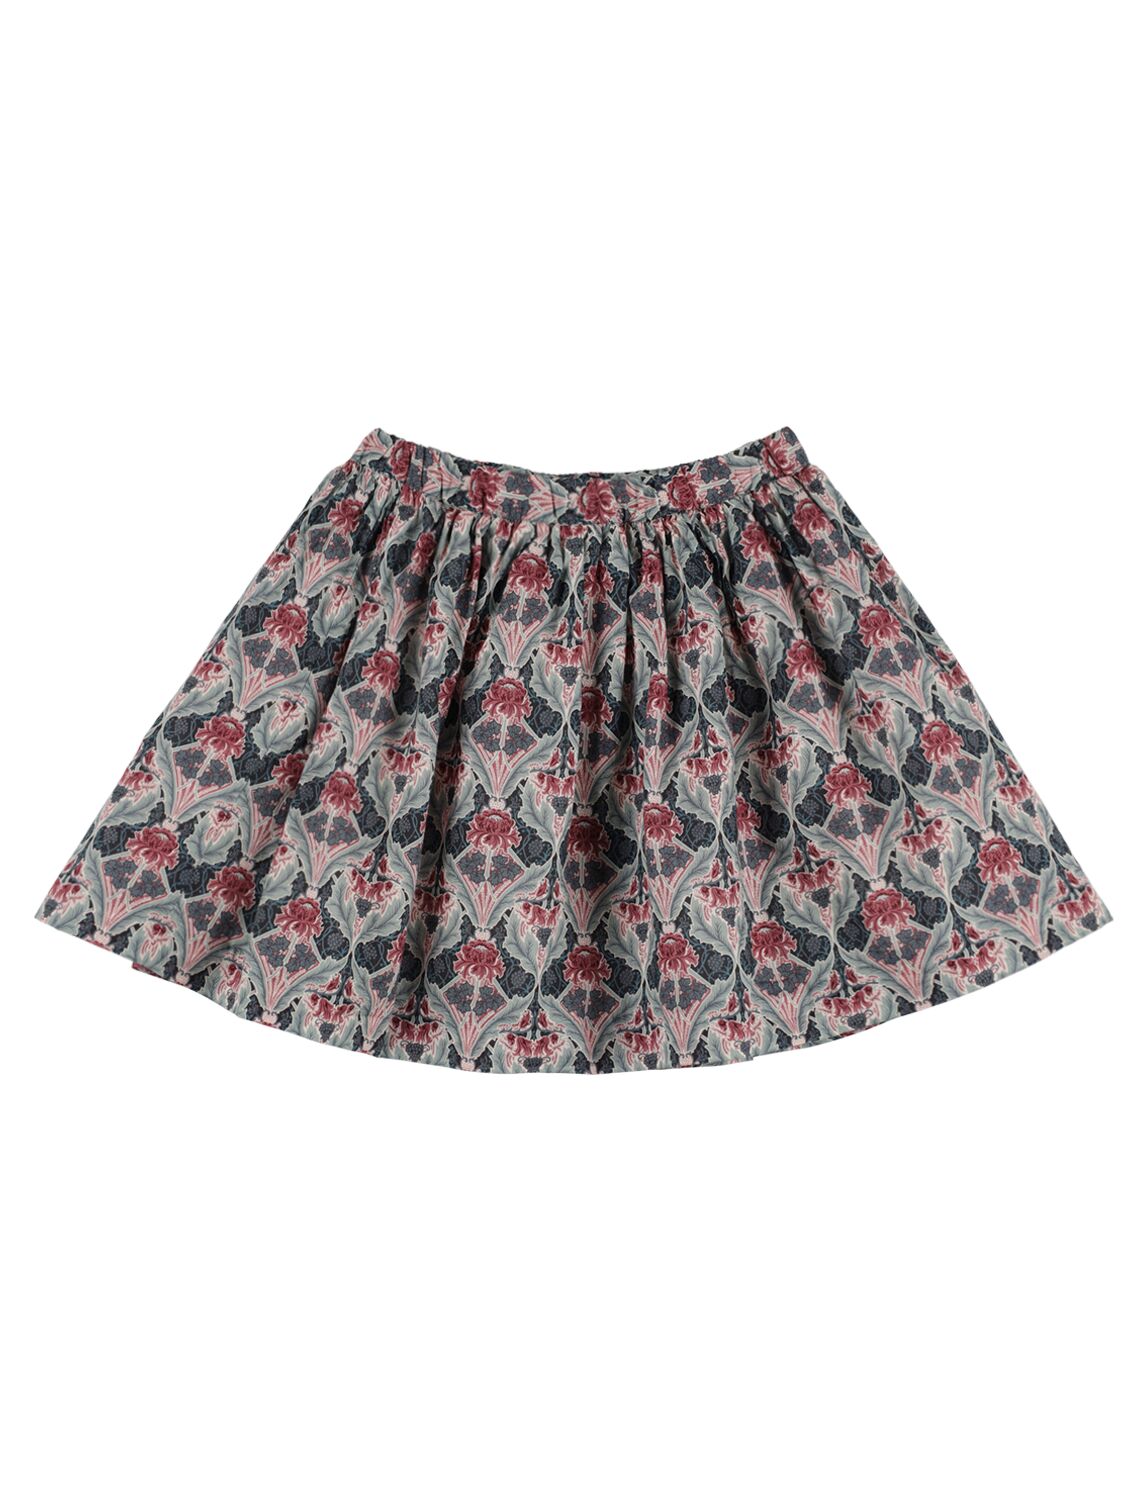 Bonpoint Kids' Calipso Printed Cotton Skirt In Multicolor